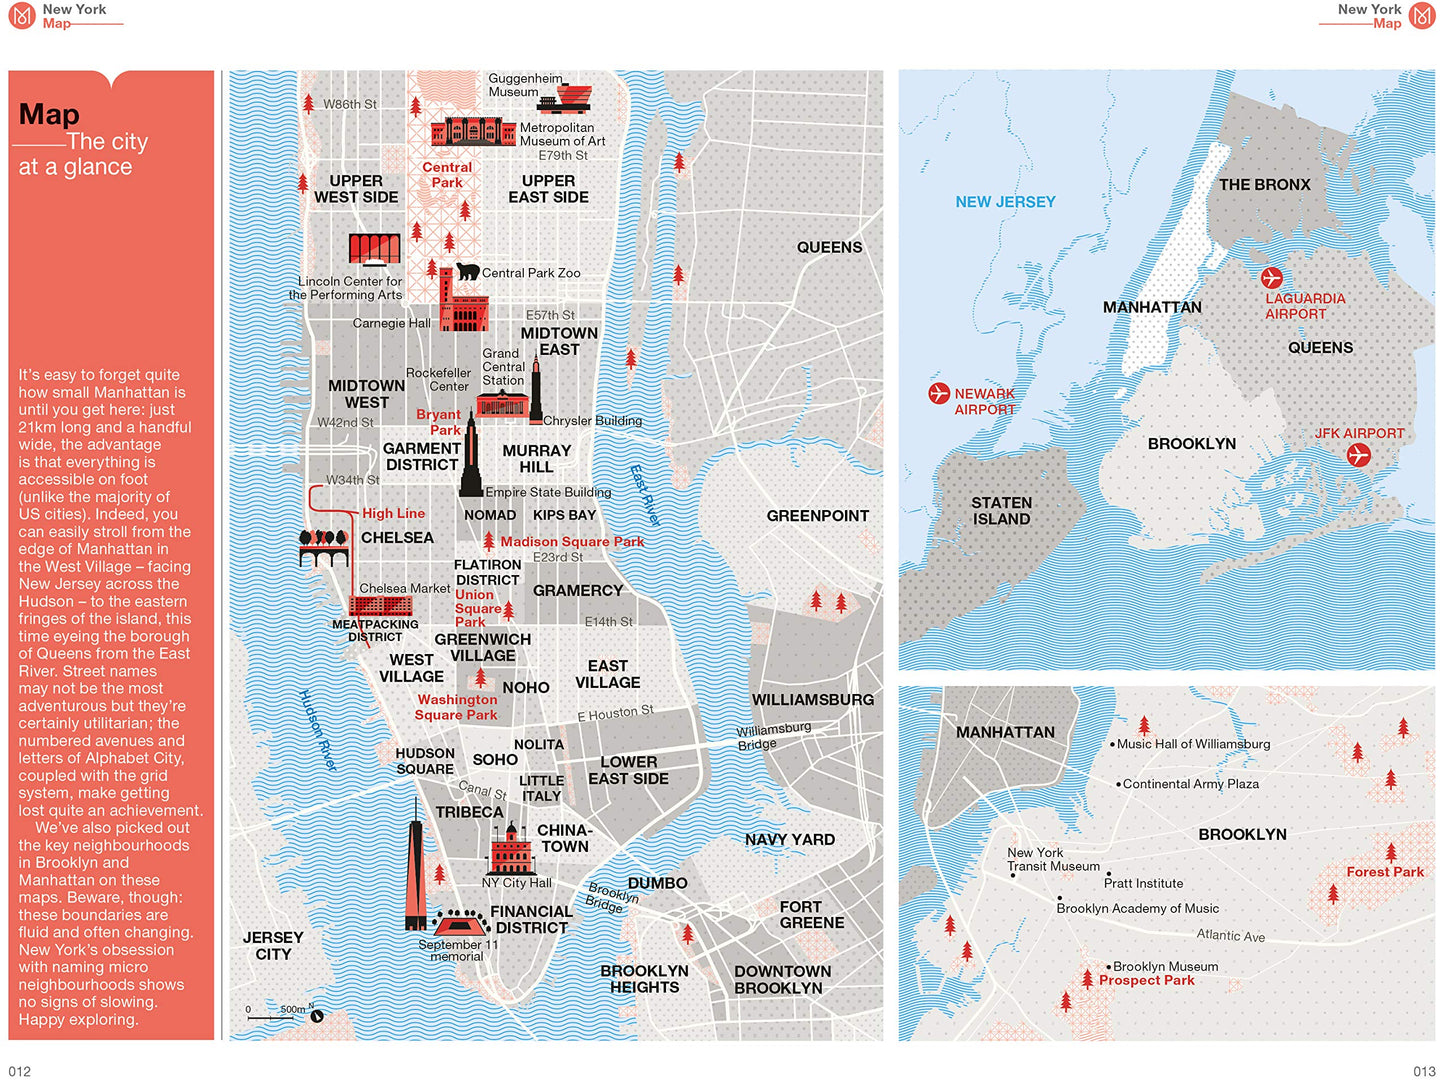 Travel Guide to New York